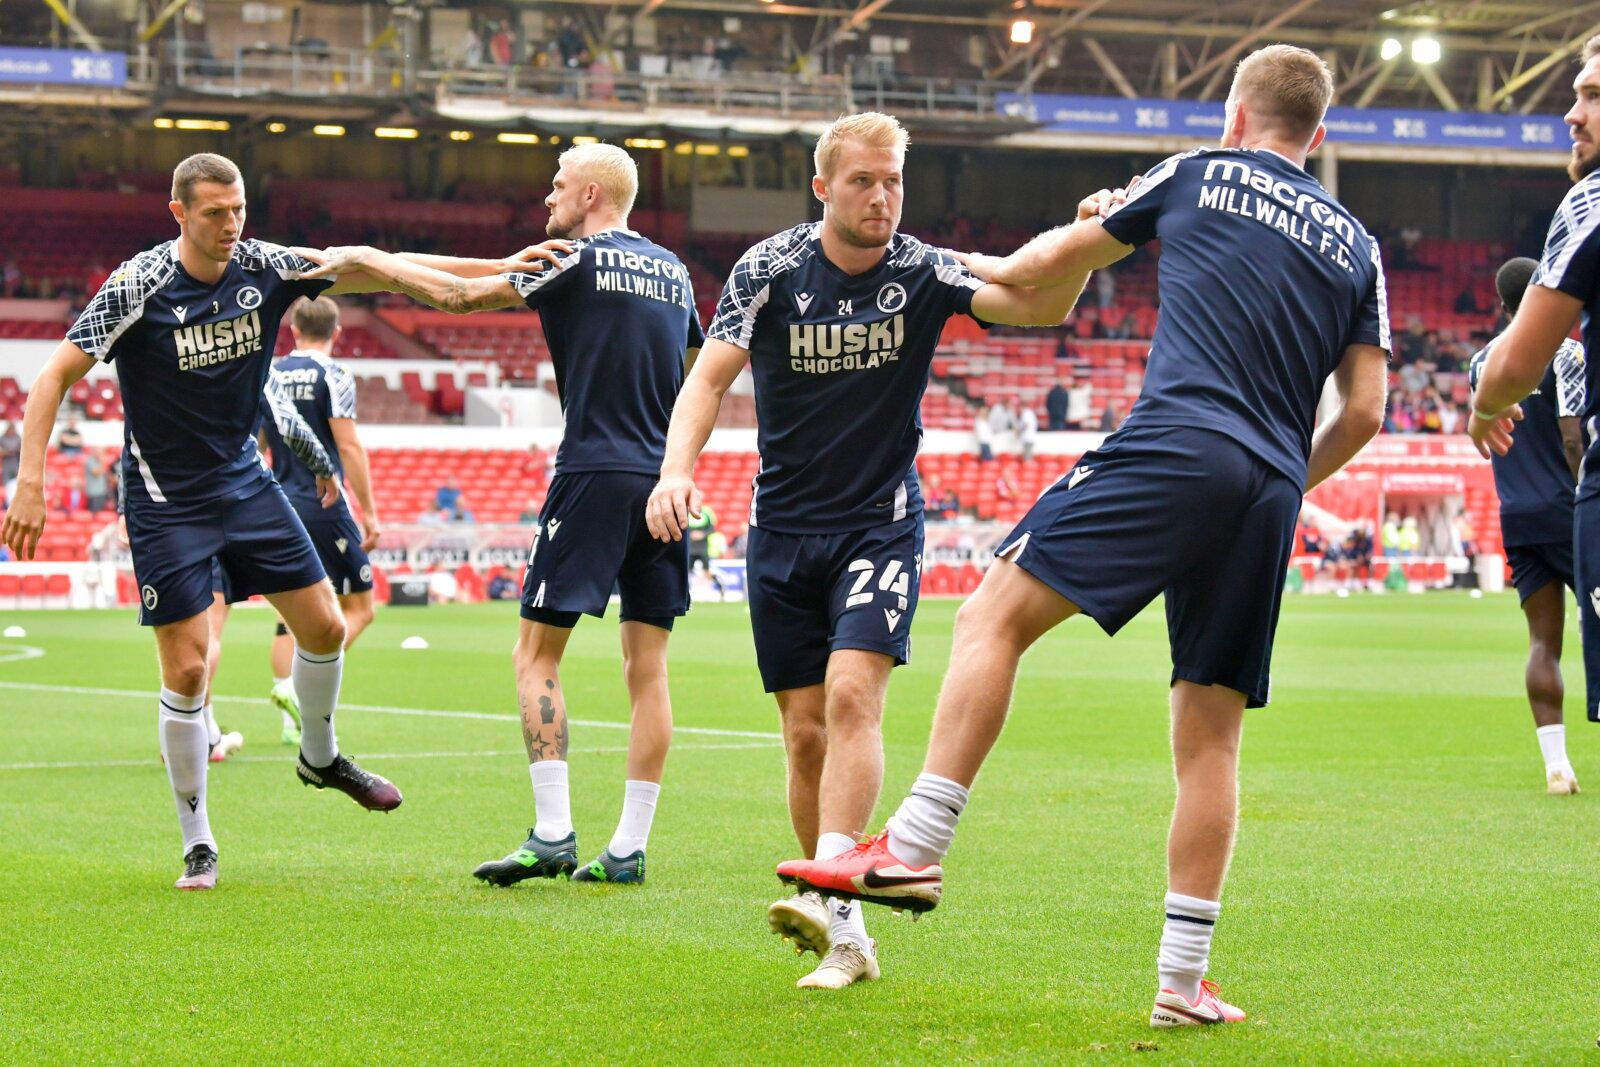 Soccer Football - Championship - Nottingham Forest v Millwall - The City Ground, Nottingham, Britain - September 25, 2021  Millwall players during the warm up  Action Images/Paul Burrows    EDITORIAL USE ONLY. No use with unauthorized audio, video, data, fixture lists, club/league logos or 